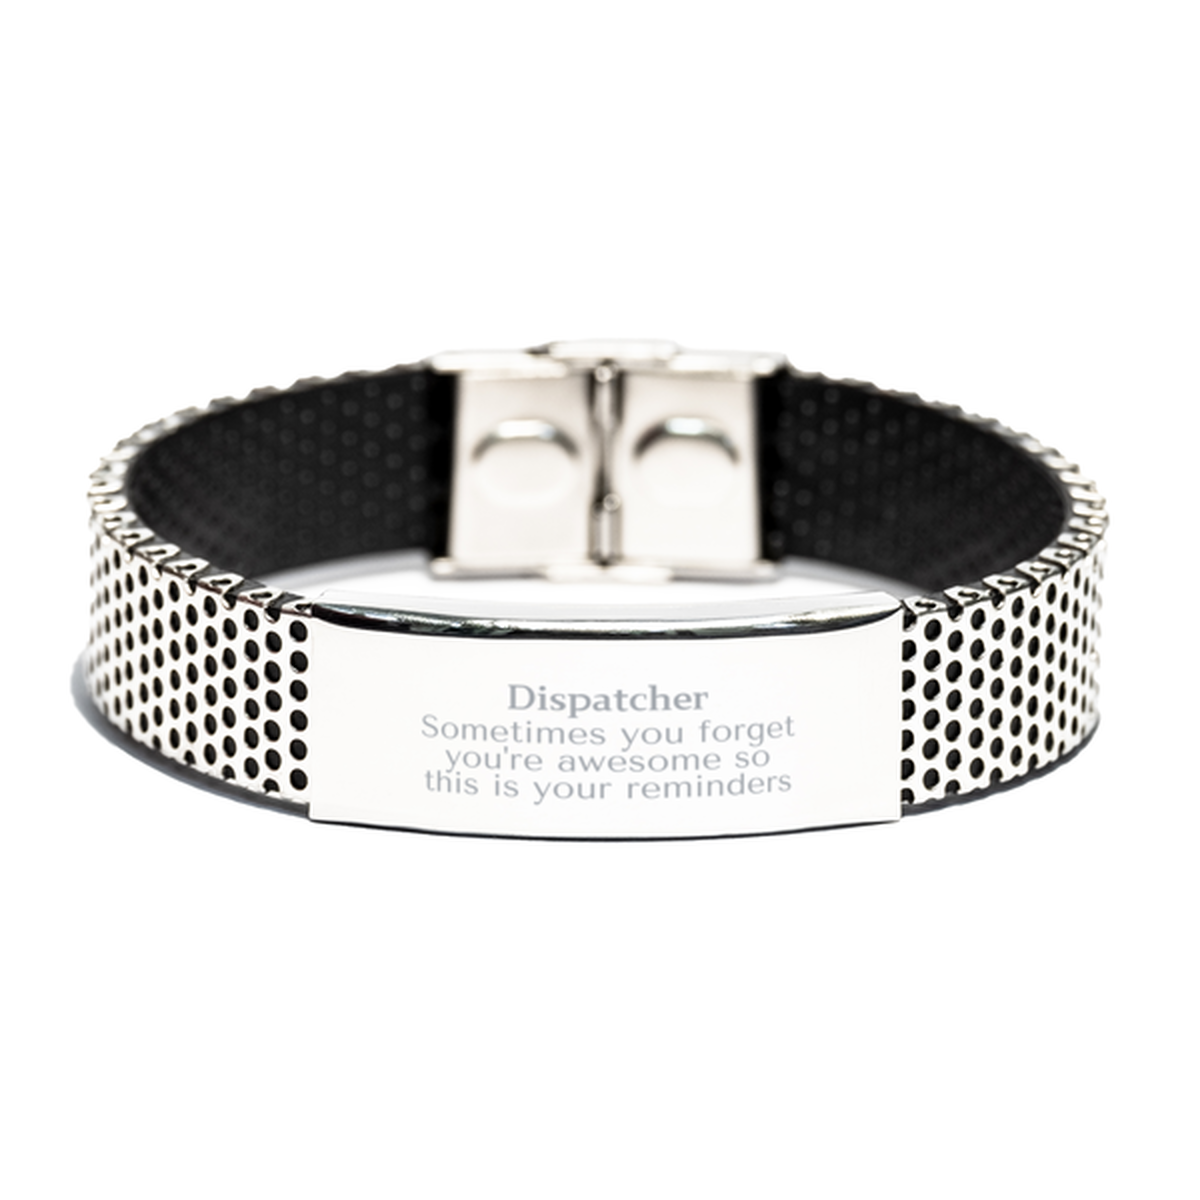 Sentimental Dispatcher Stainless Steel Bracelet, Dispatcher Sometimes you forget you're awesome so this is your reminders, Graduation Christmas Birthday Gifts for Dispatcher, Men, Women, Coworkers